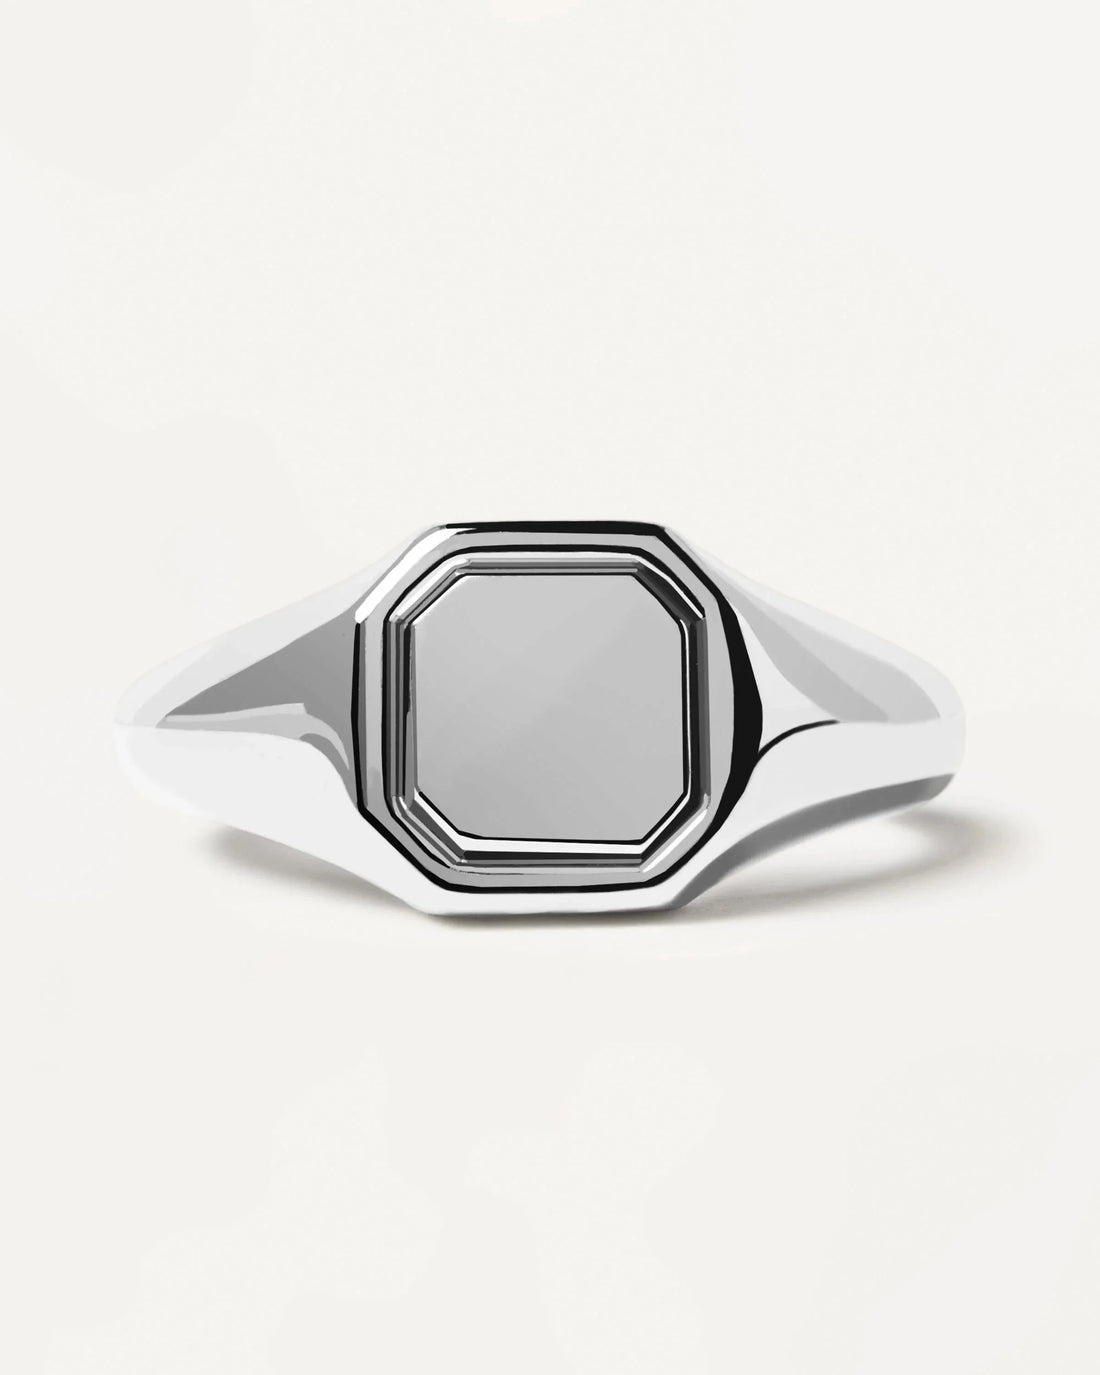 Marquet Silver Signet Ring